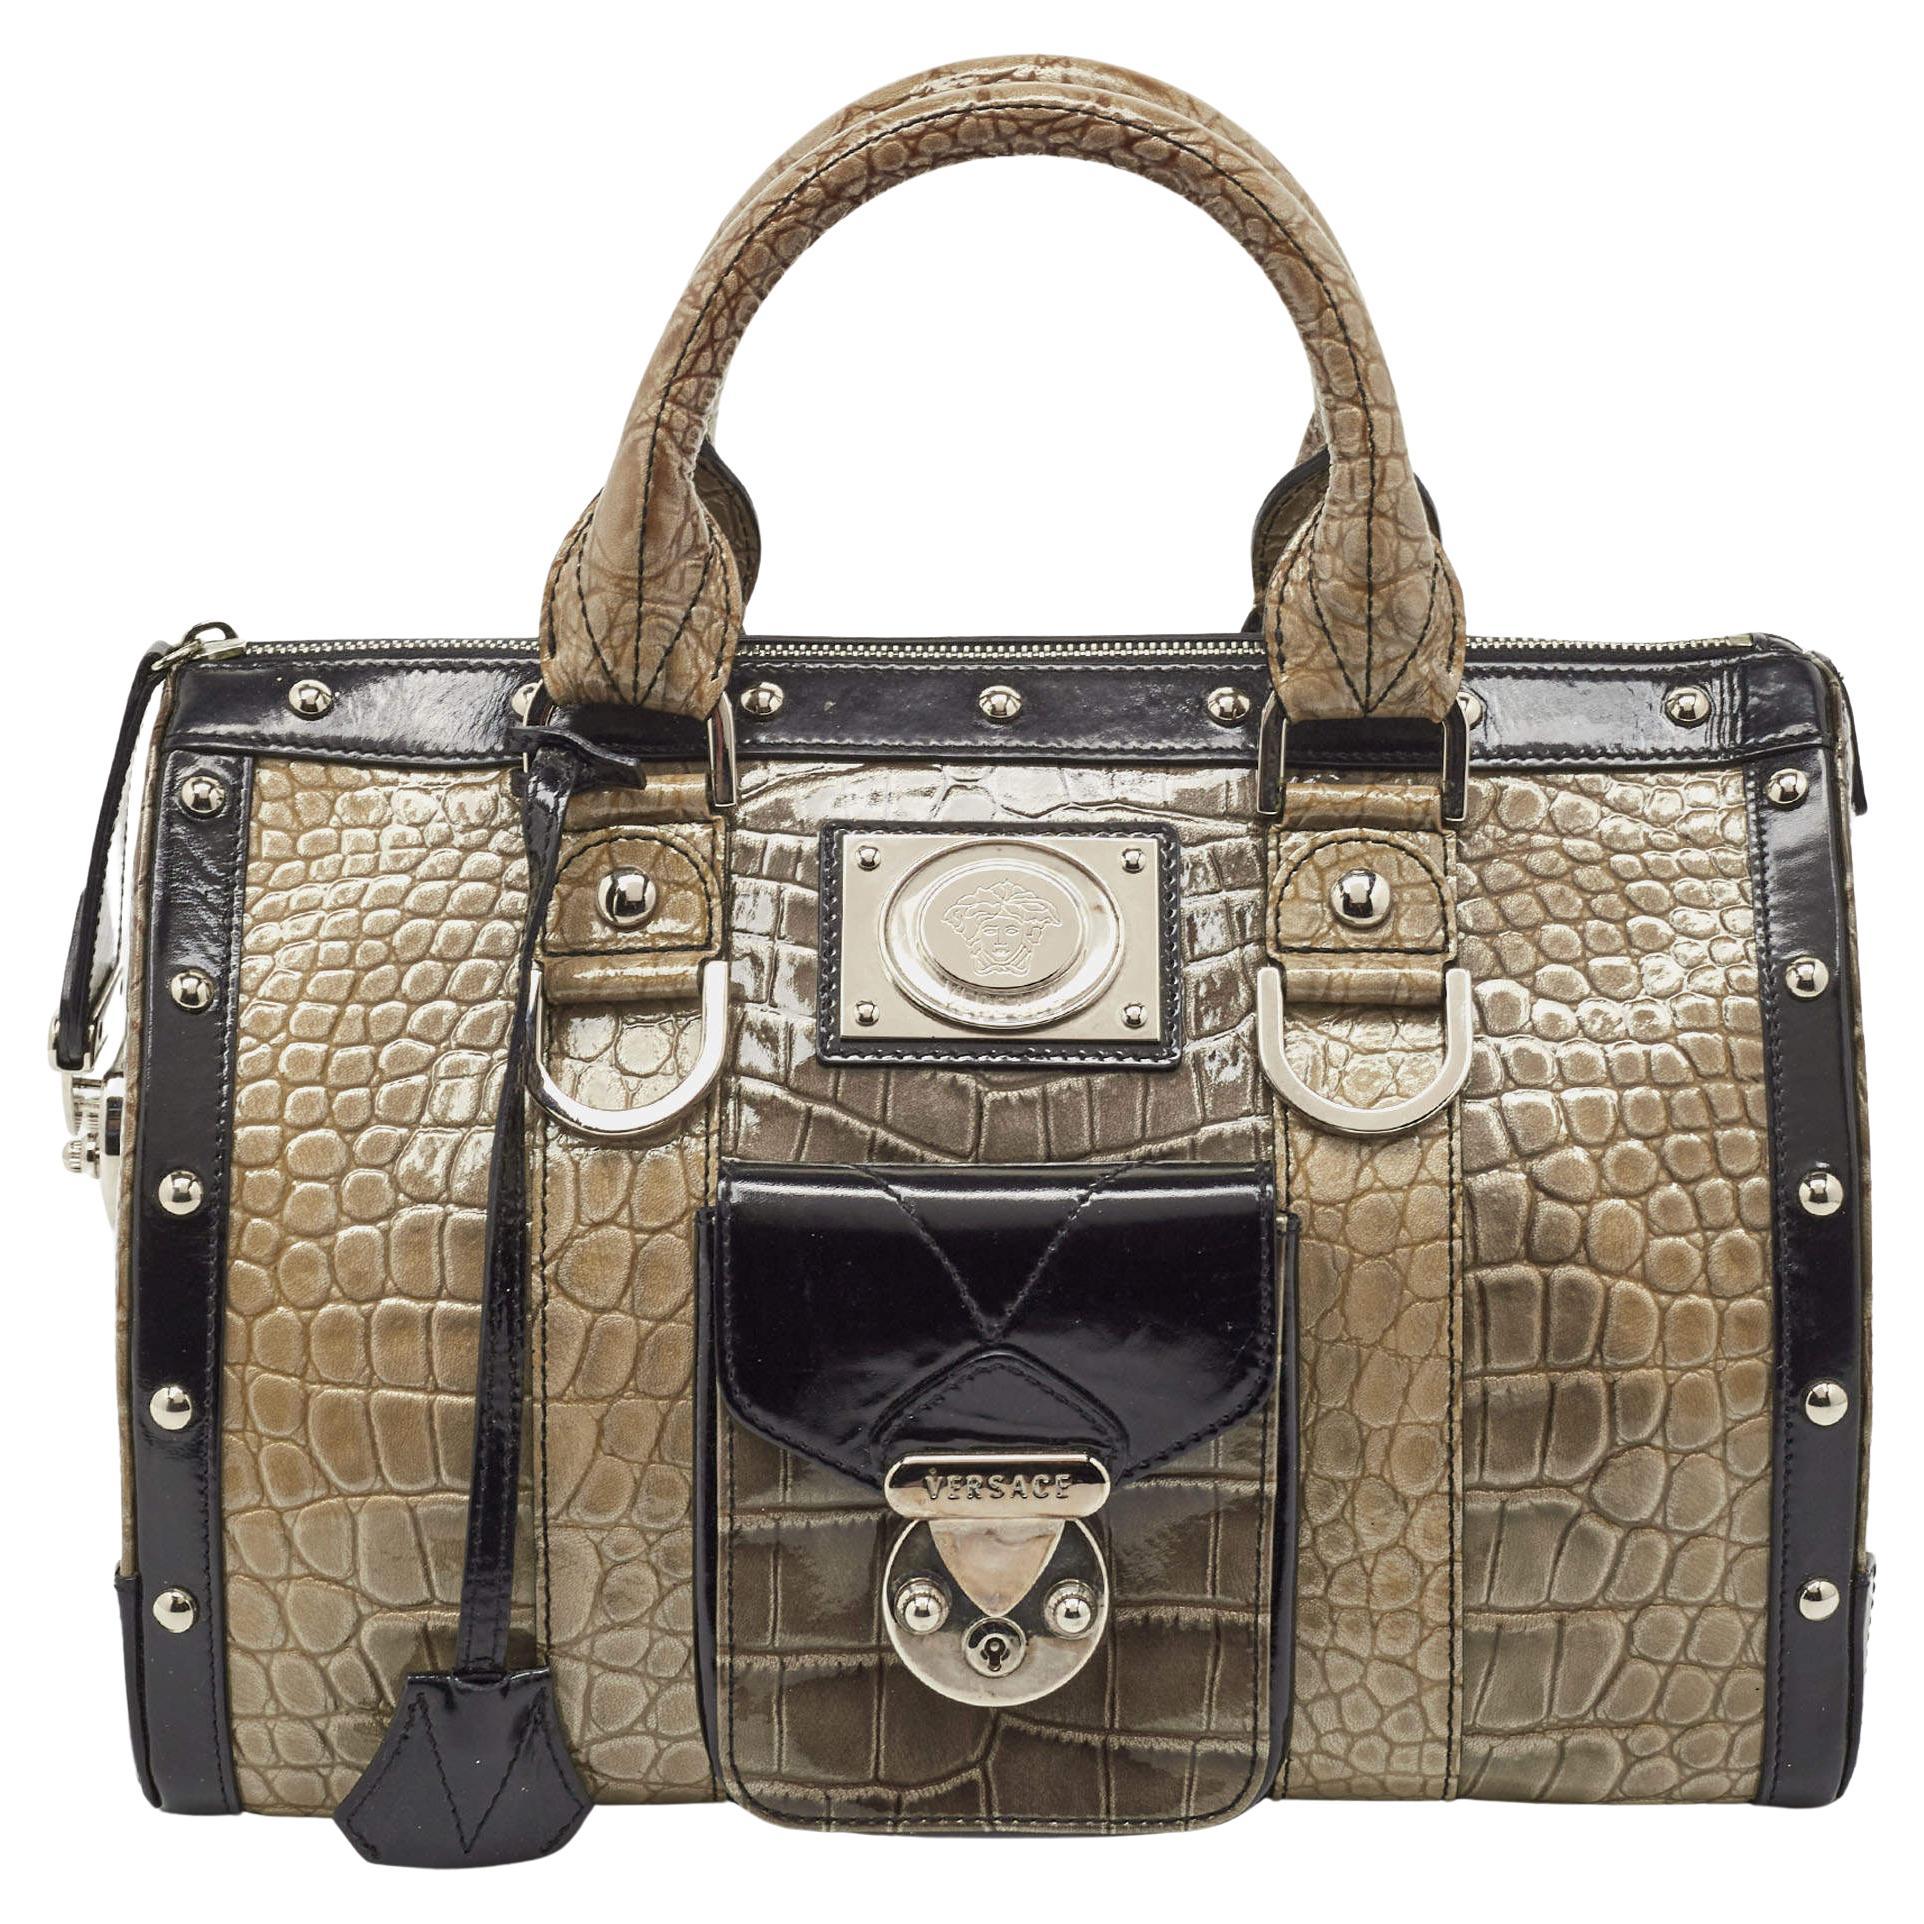 Versace Black/Beige Croc Embossed and Patent Leather Studded Madonna Satchel